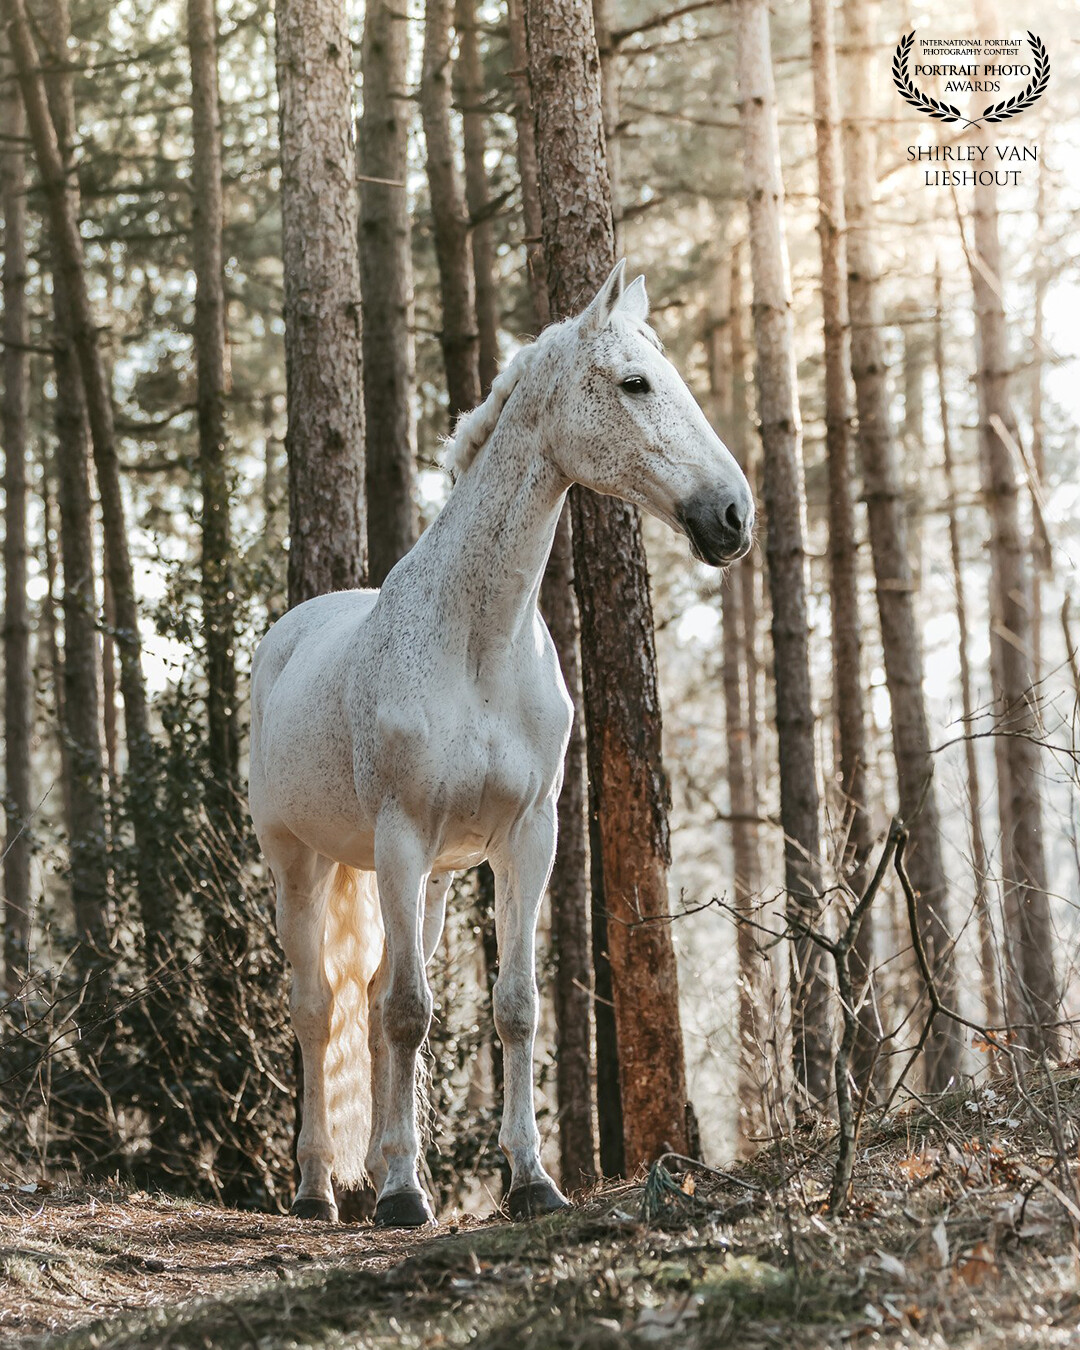 Gorgeous white horse 'Cumlaude' in the forest. The sun is peeking through the leaves and shines beautifully on her head. I love this picture, it is so serene.